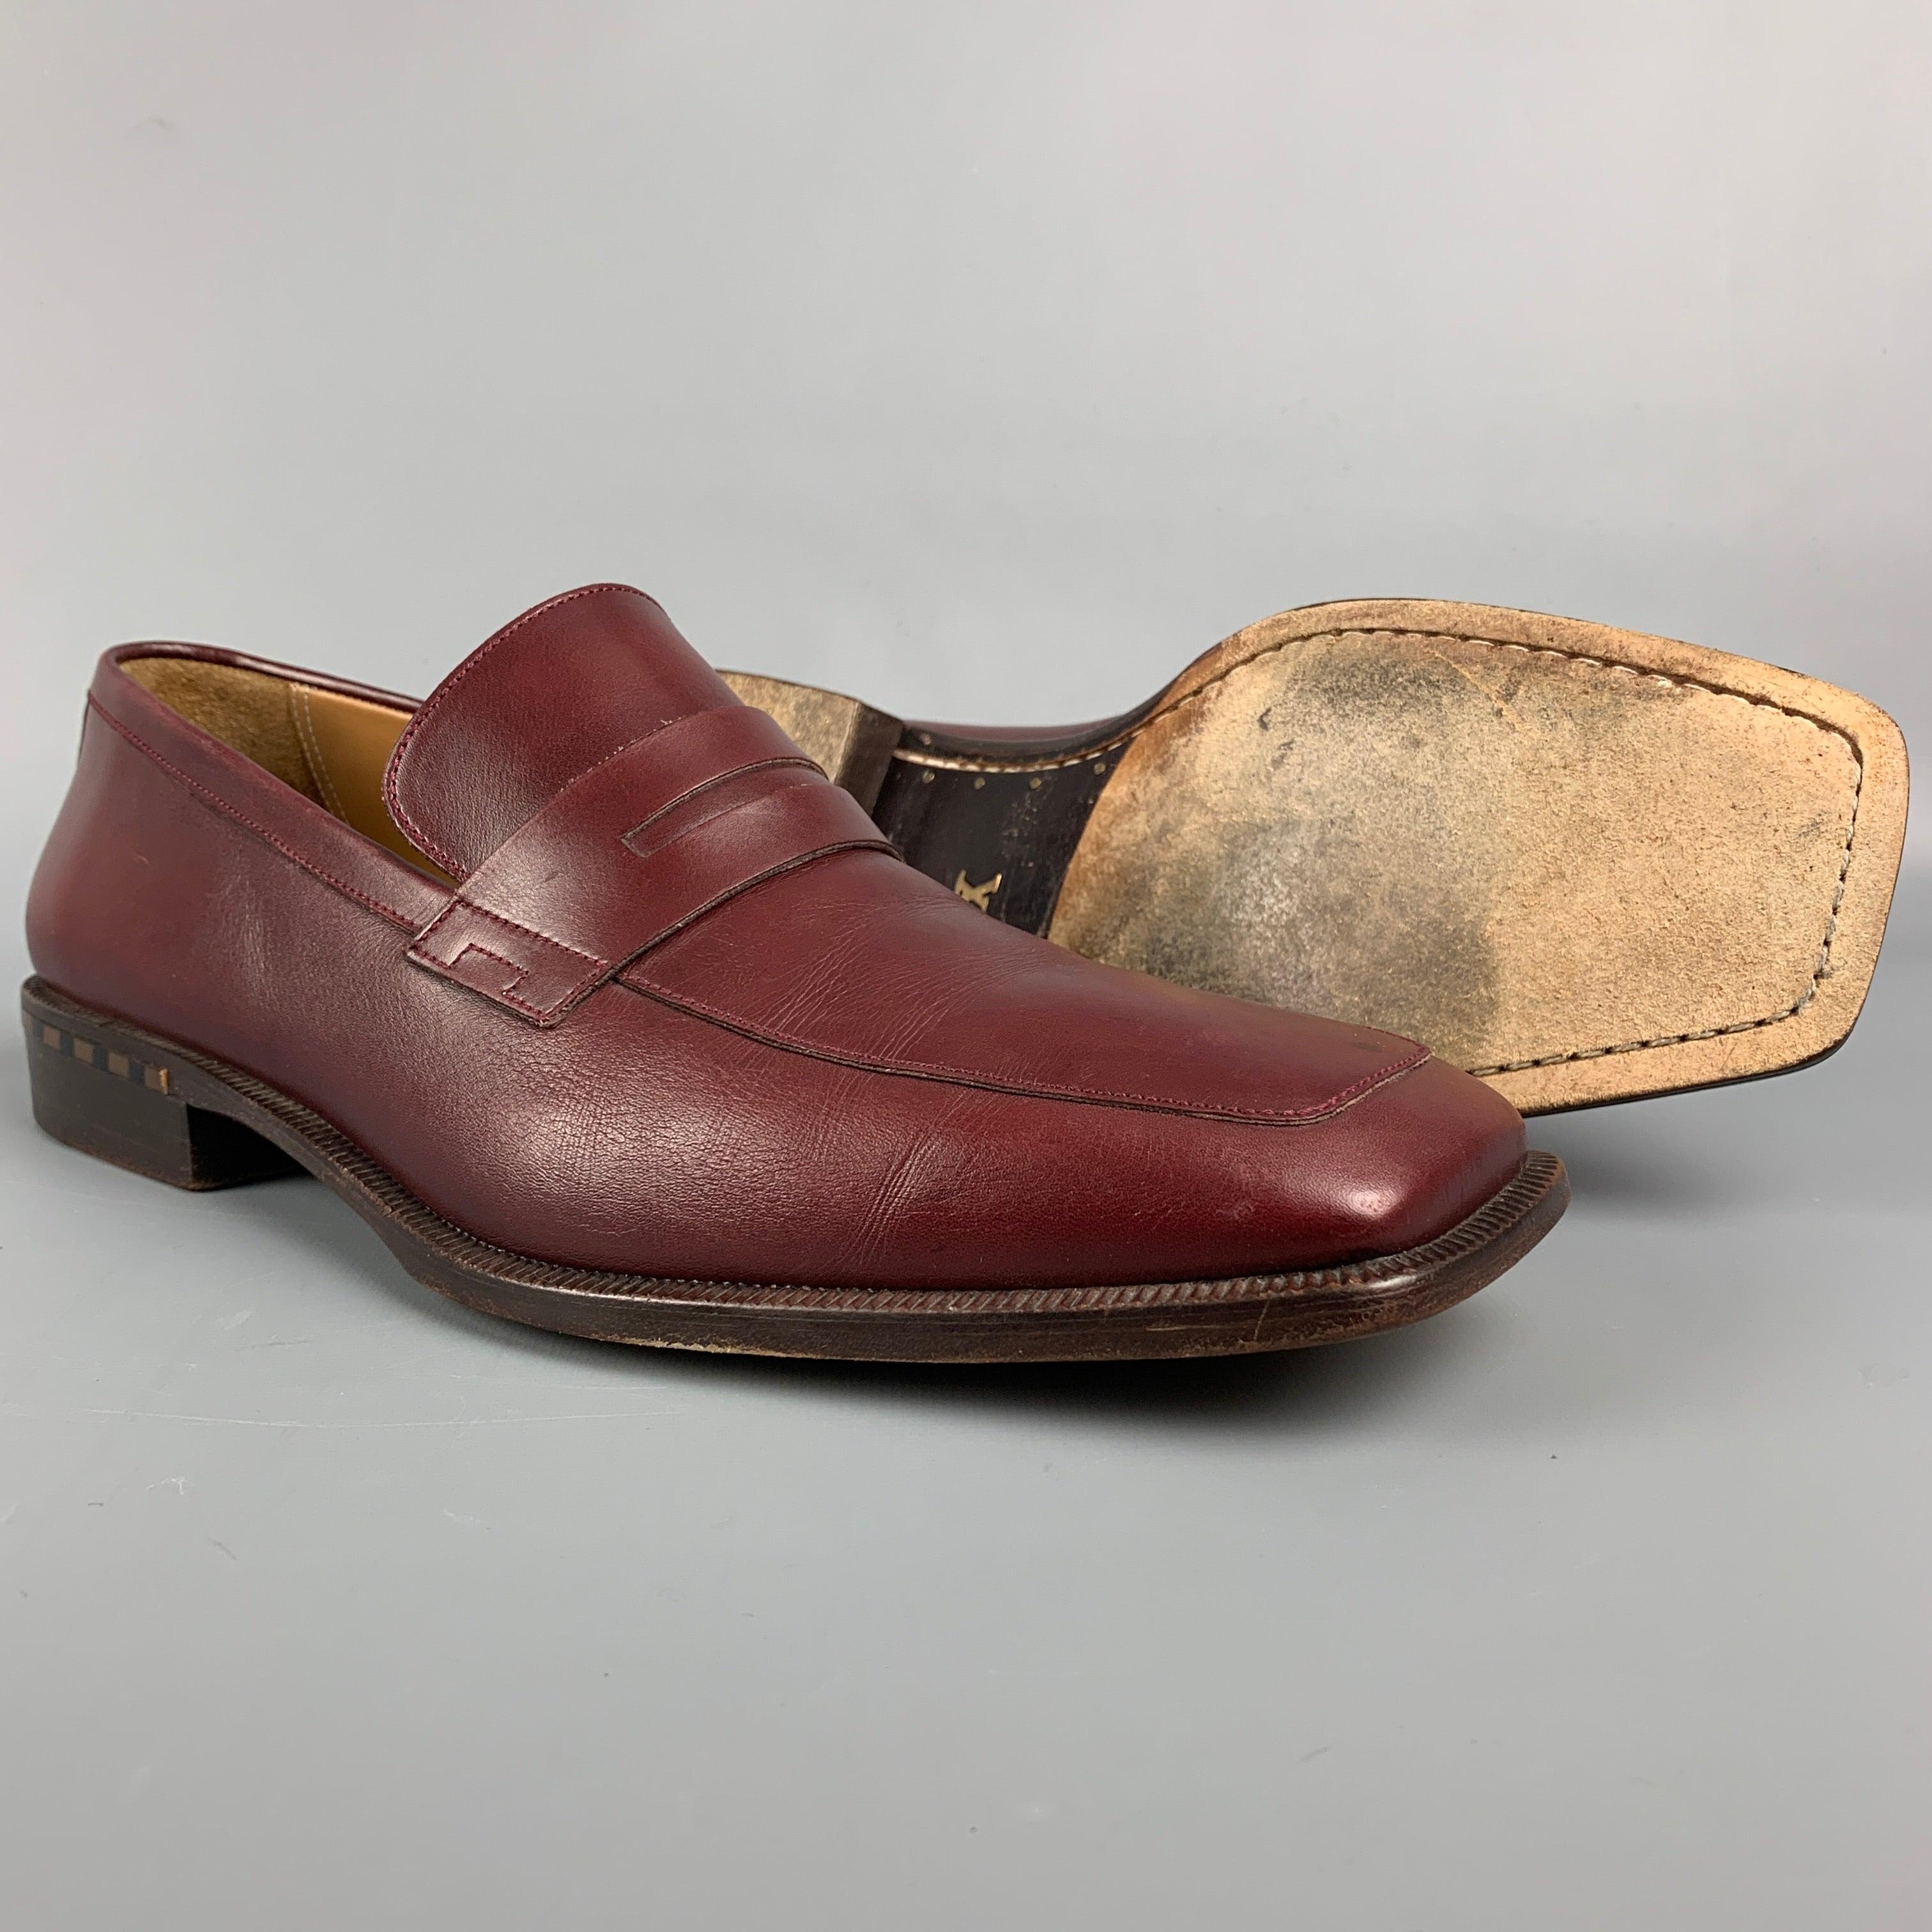 LOUIS VUITTON Size 10 Burgundy Leather Square Toe Loafers In Good Condition For Sale In San Francisco, CA